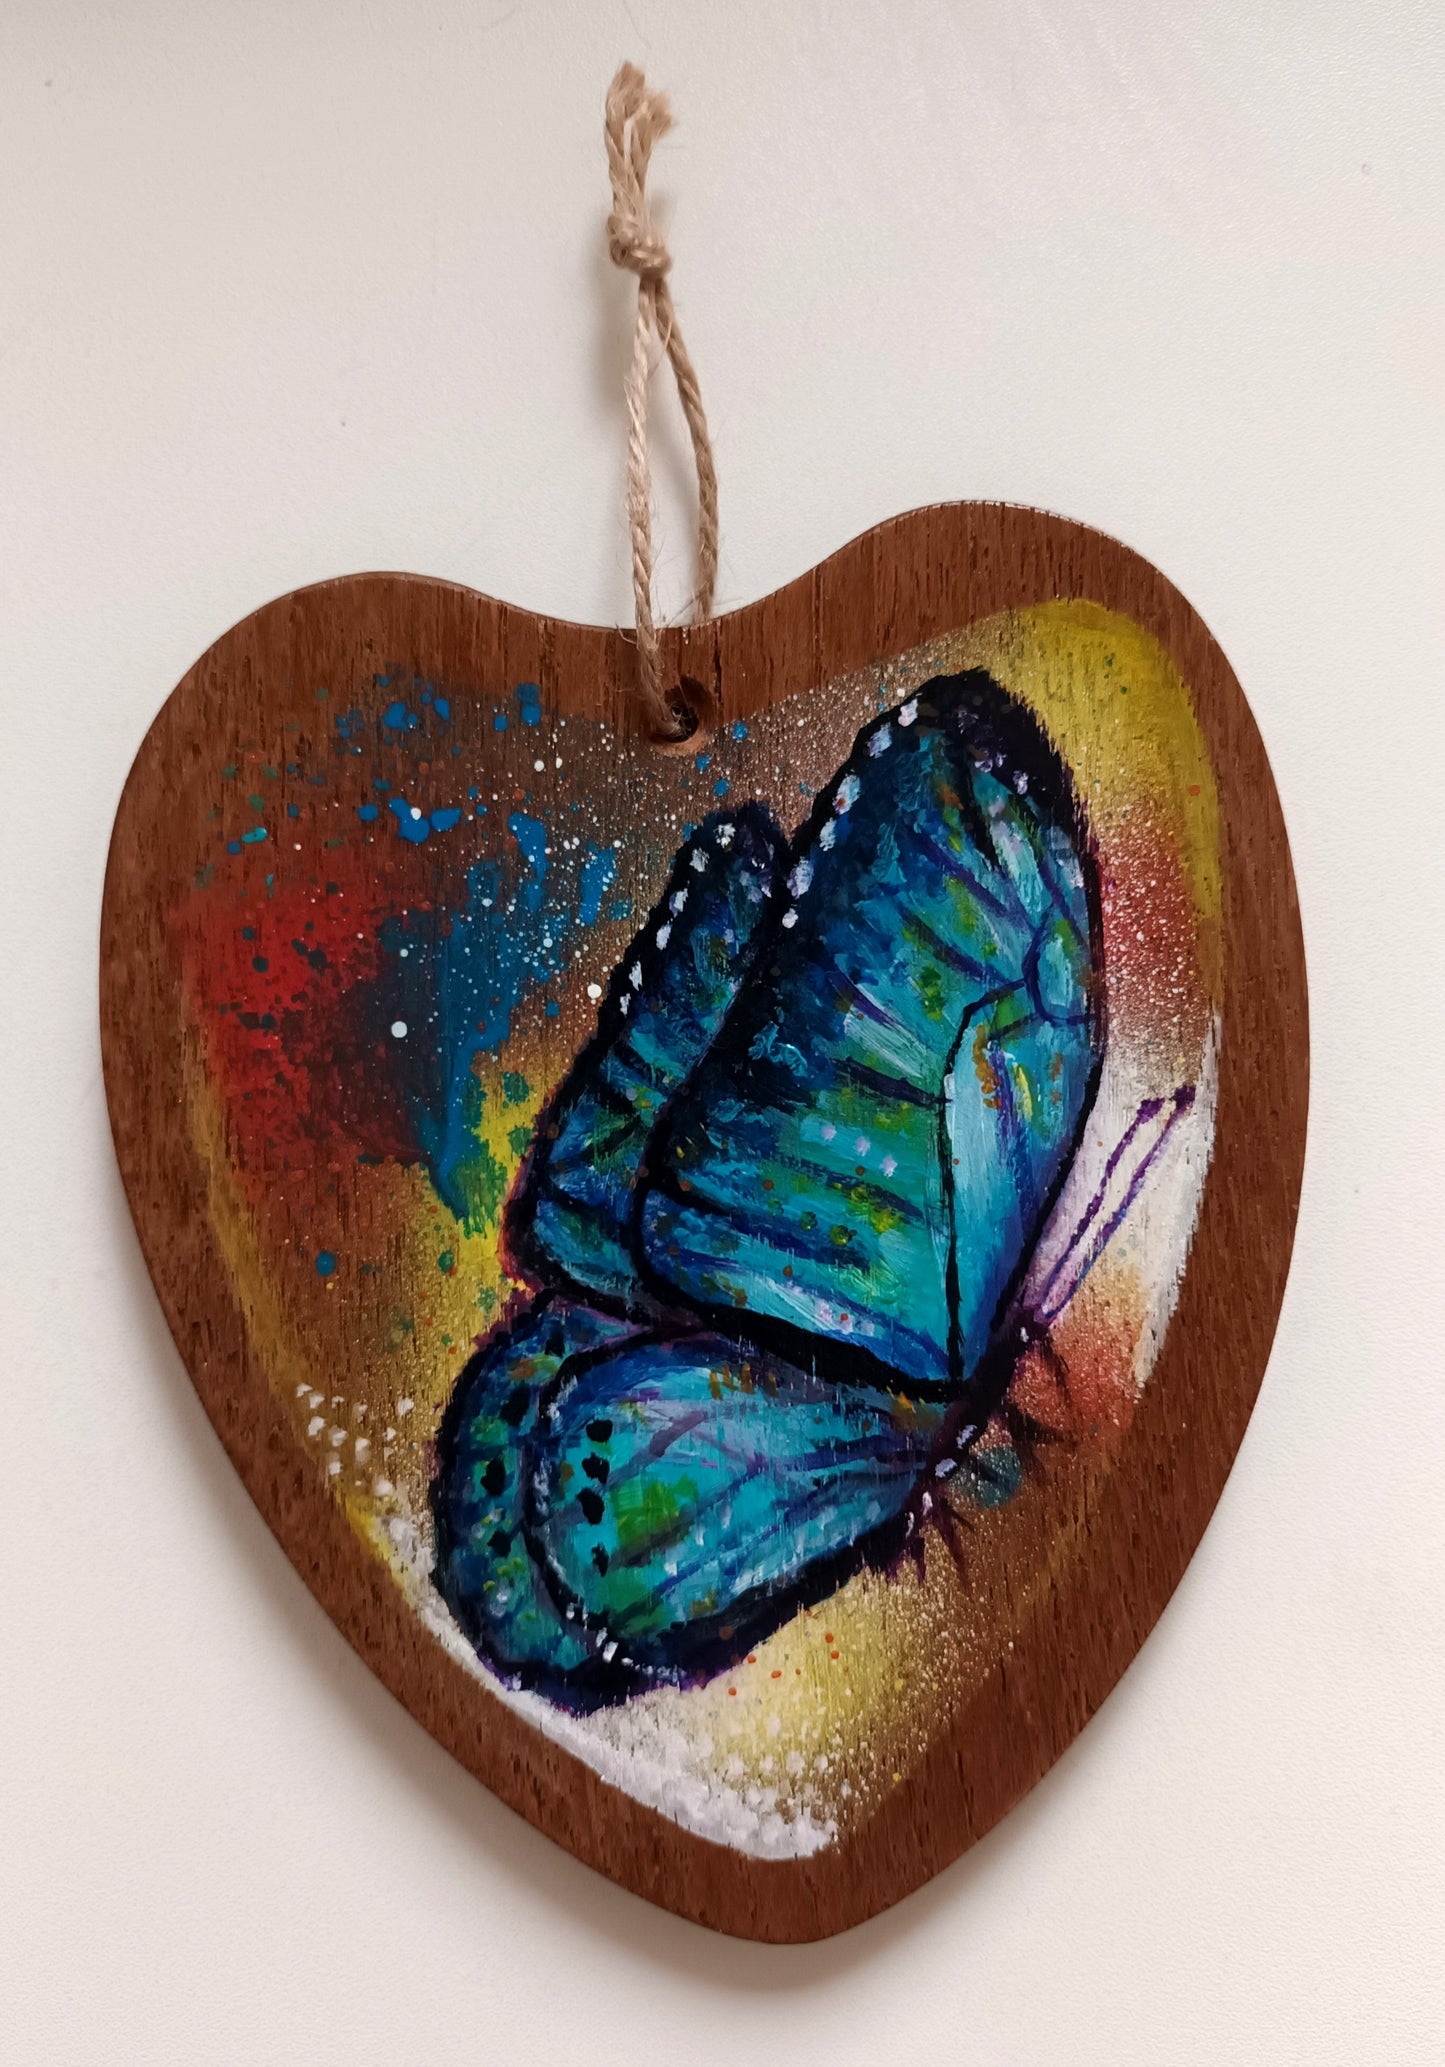 "Transformation Magic" Painting on a wooden heart